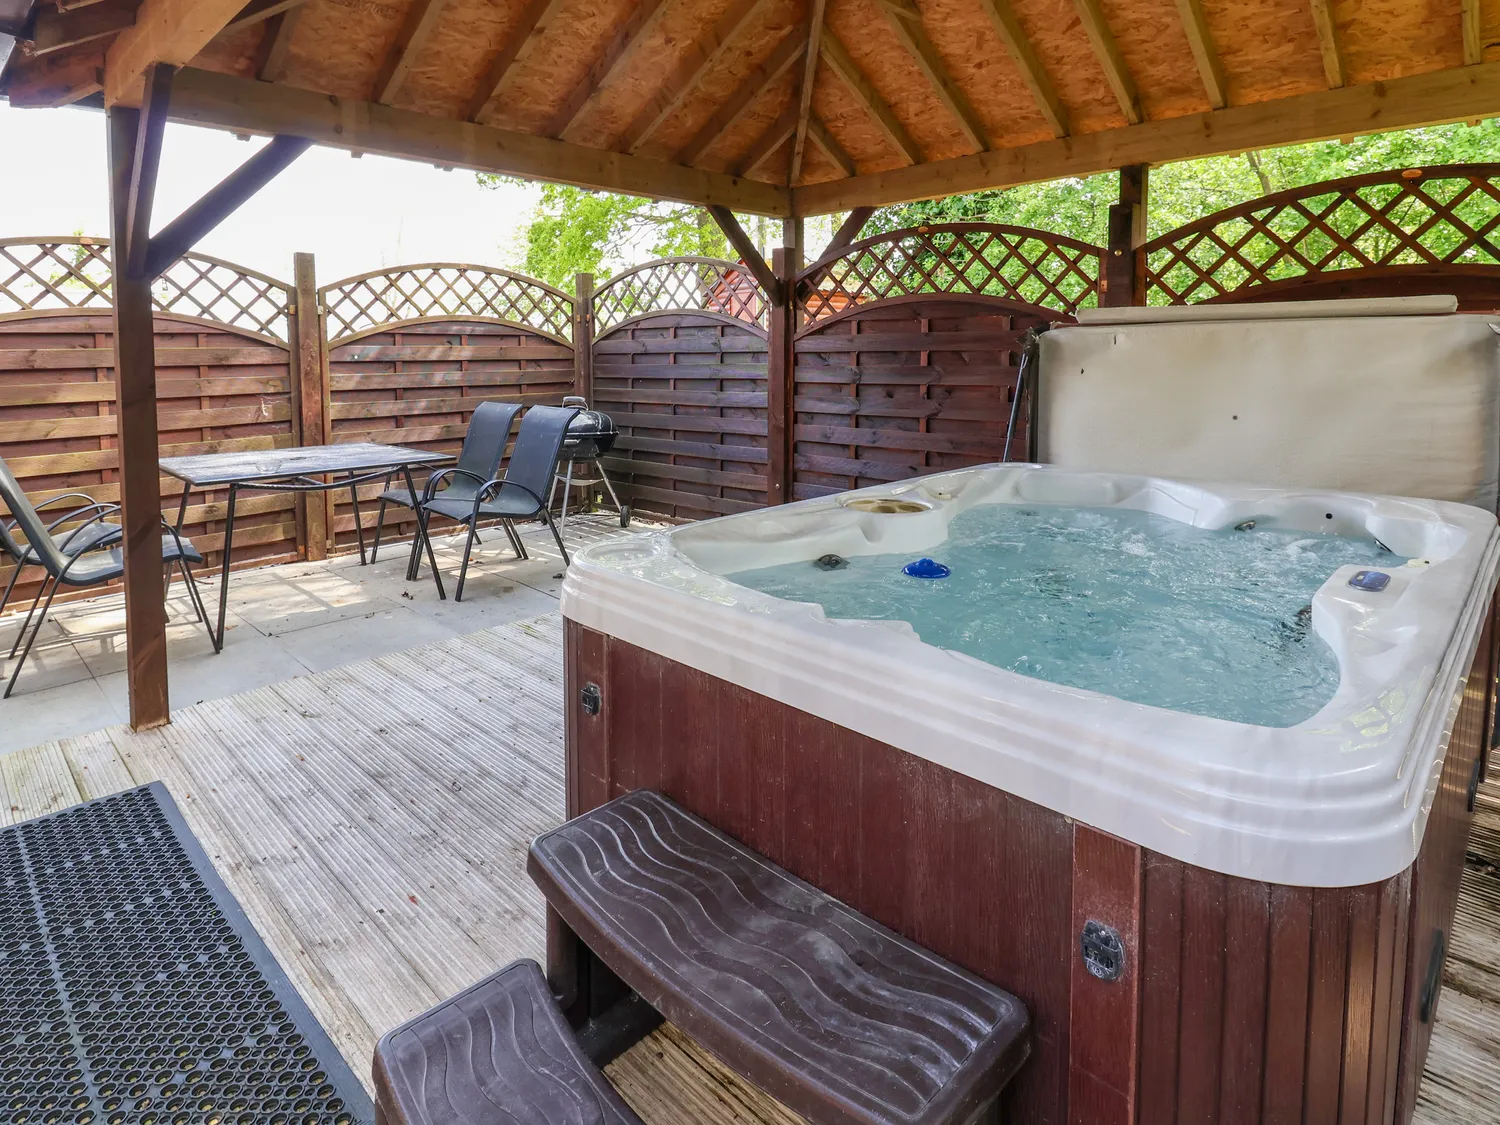 The Blacktail Hot Tub